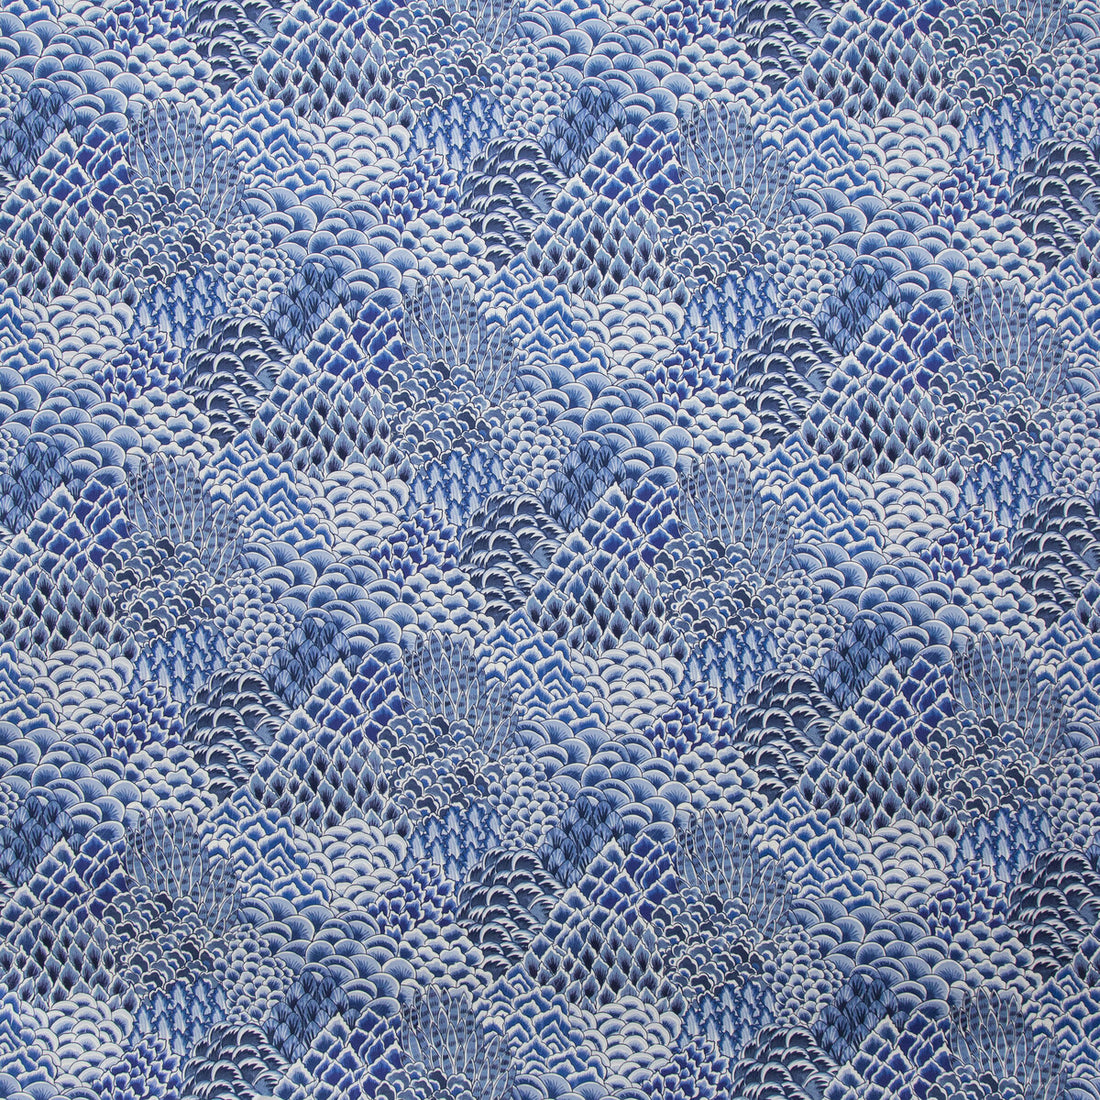 Katibi Print fabric in blue color - pattern 8020104.55.0 - by Brunschwig &amp; Fils in the Grand Bazaar collection